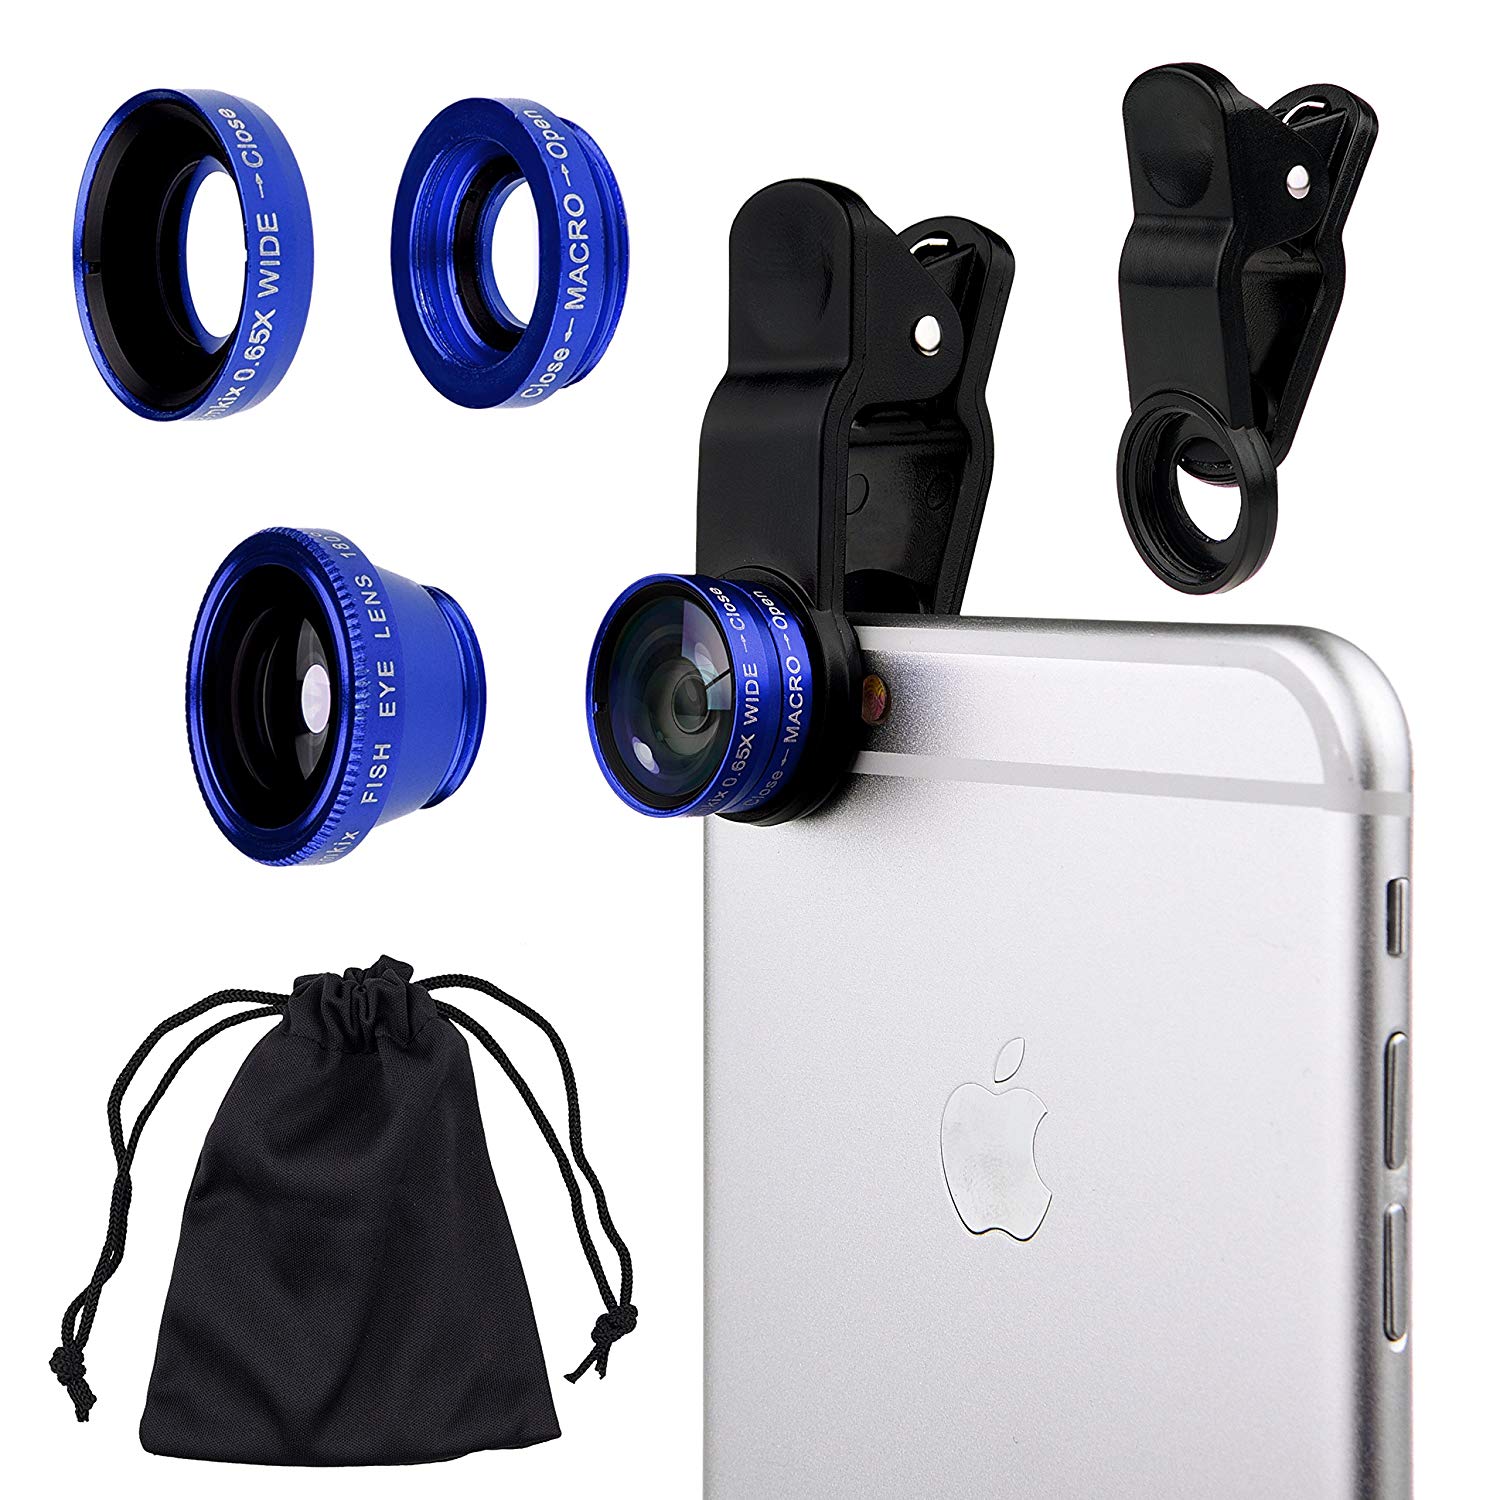 Amazon.com: CamKix Universal 3 in 1 Cell Phone Camera Lens Kit for ...